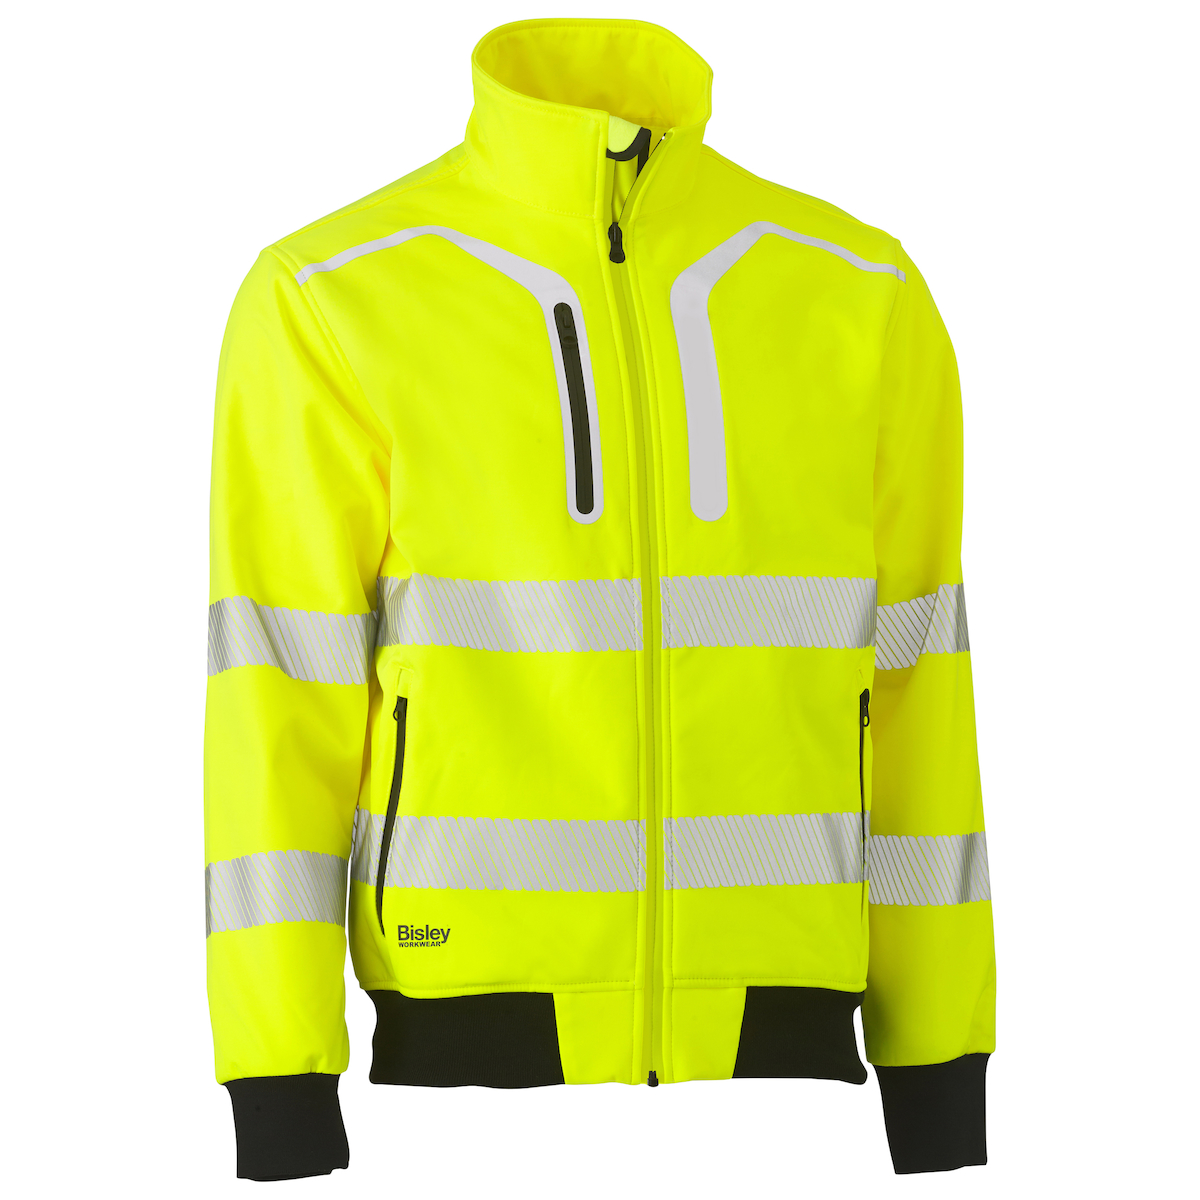 BISLEY TYPE R CLASS 3 SOFT SHELL JACKET - New Products